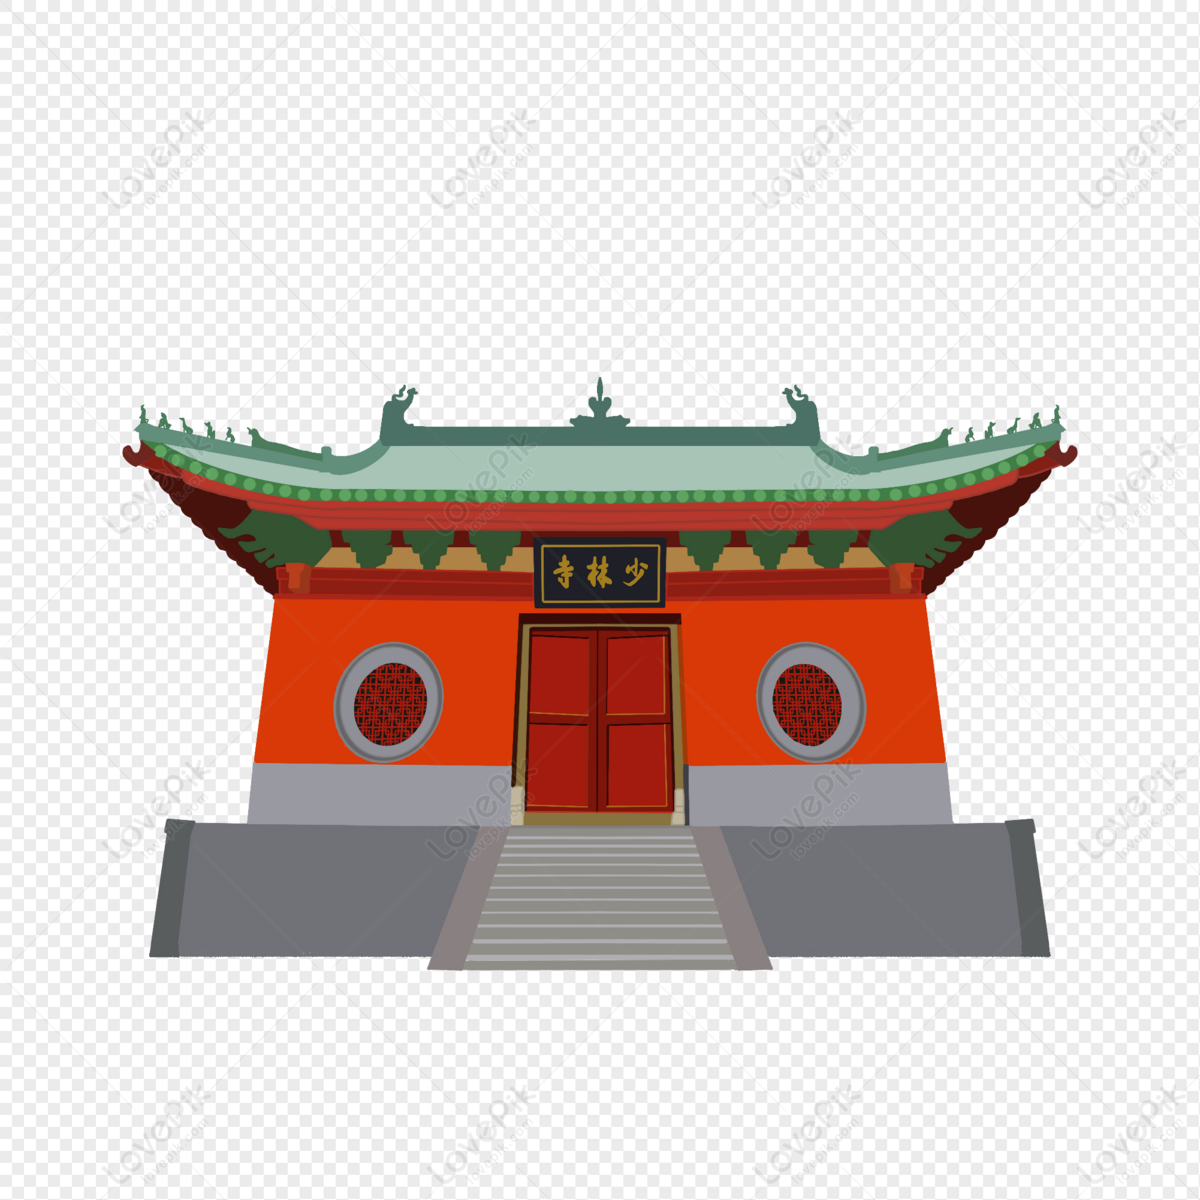 lovepik hand painted shaolin temple png image 401452203 wh1200